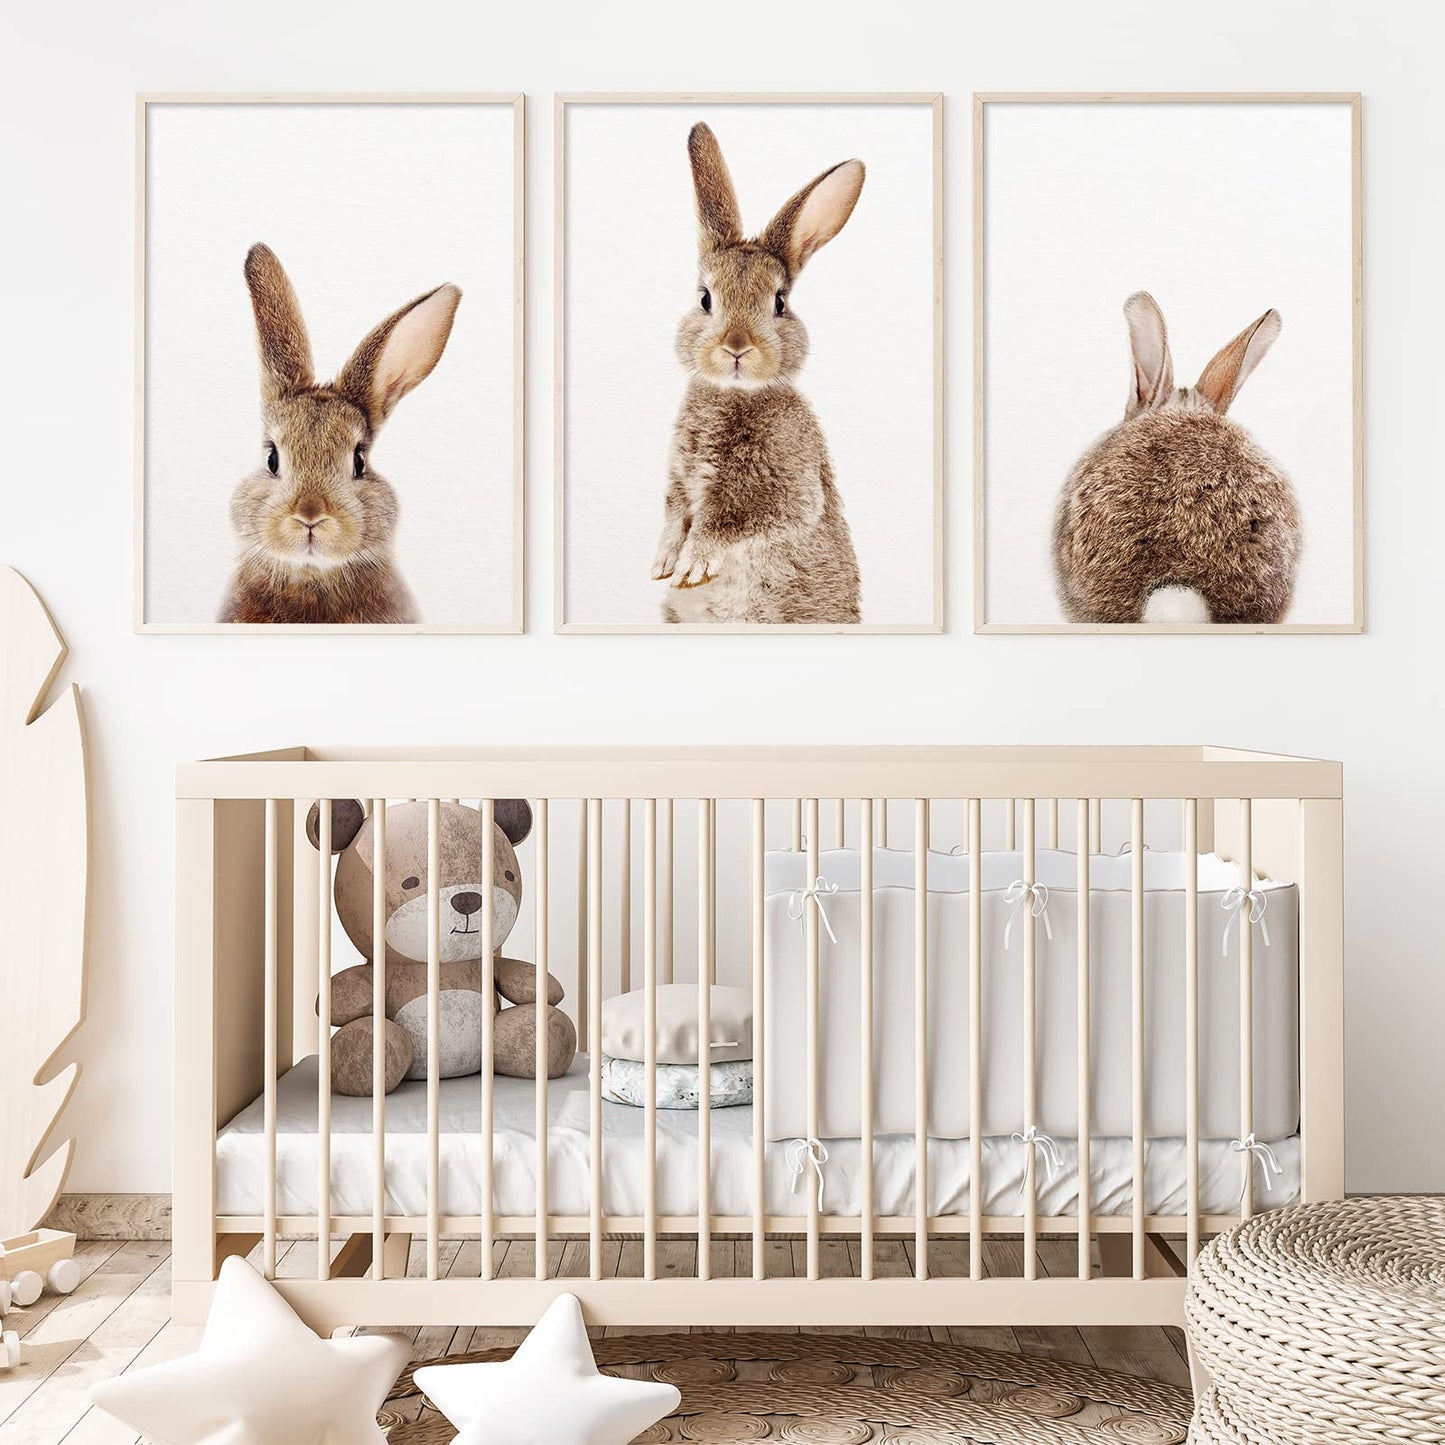 AnyDesign 3Pcs Easter Bunny Wall Art Prints 8 x 10 Inch Baby Bunny Rabbit Art Poster Cute Brown Rabbit Prints Room Decor Aesthetic for Nursery Wall Kids Bedroom Home Decor(NO FRAME)